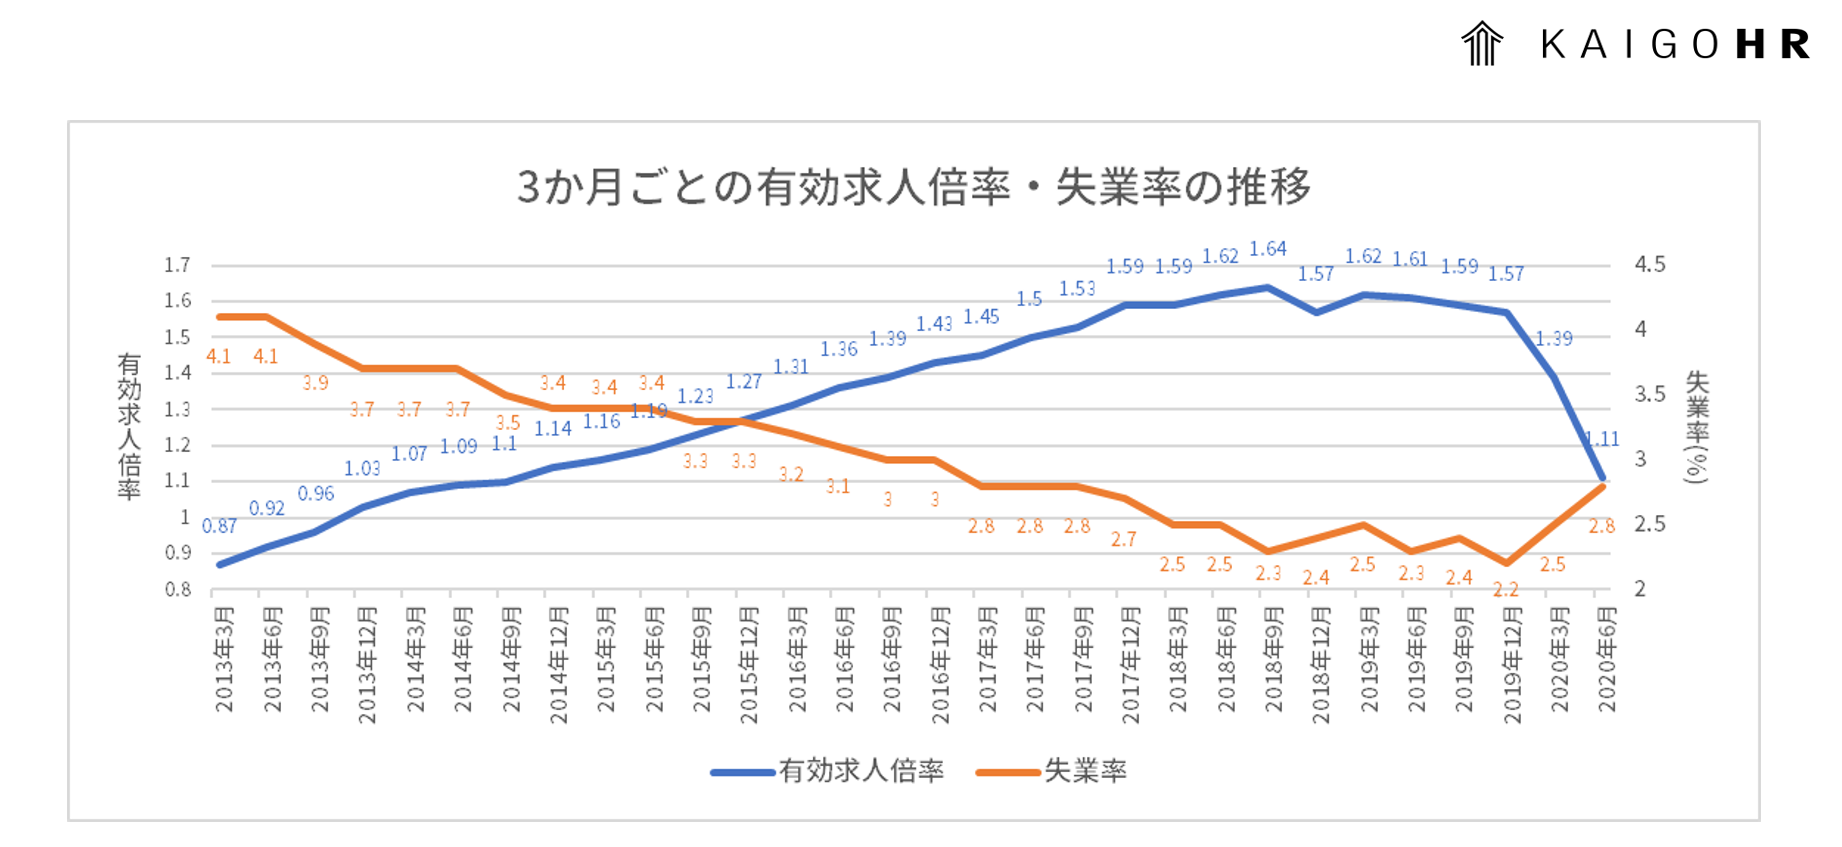 hr-data2006-03.PNG